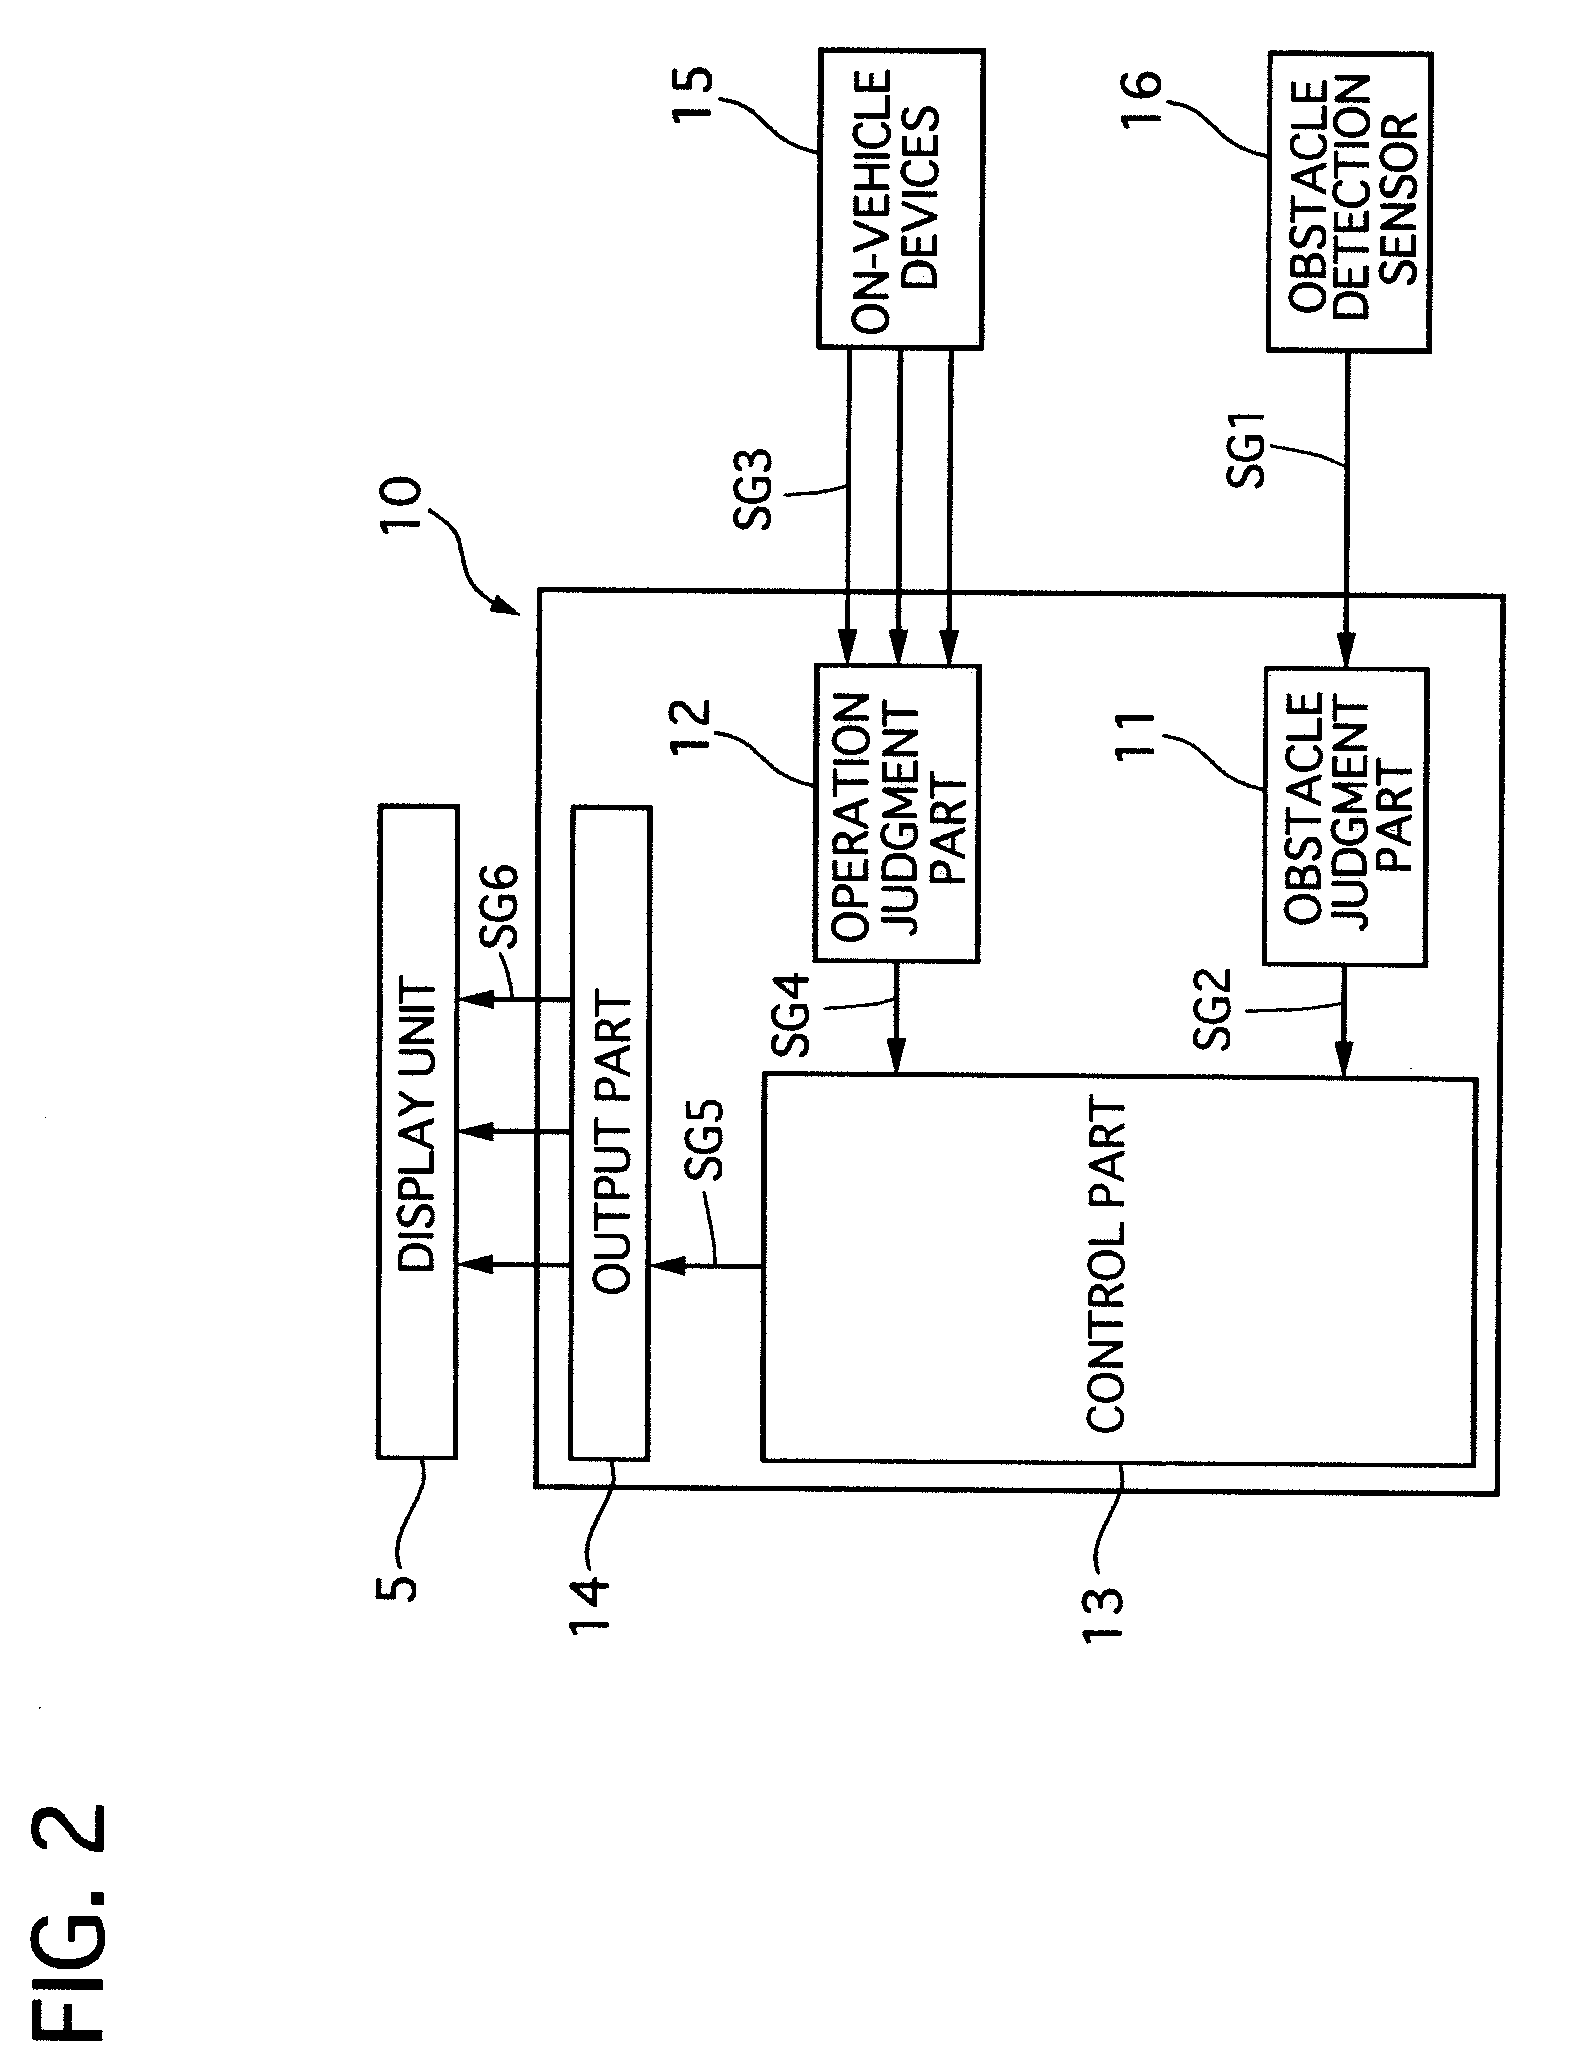 Head-up display device for vehicle